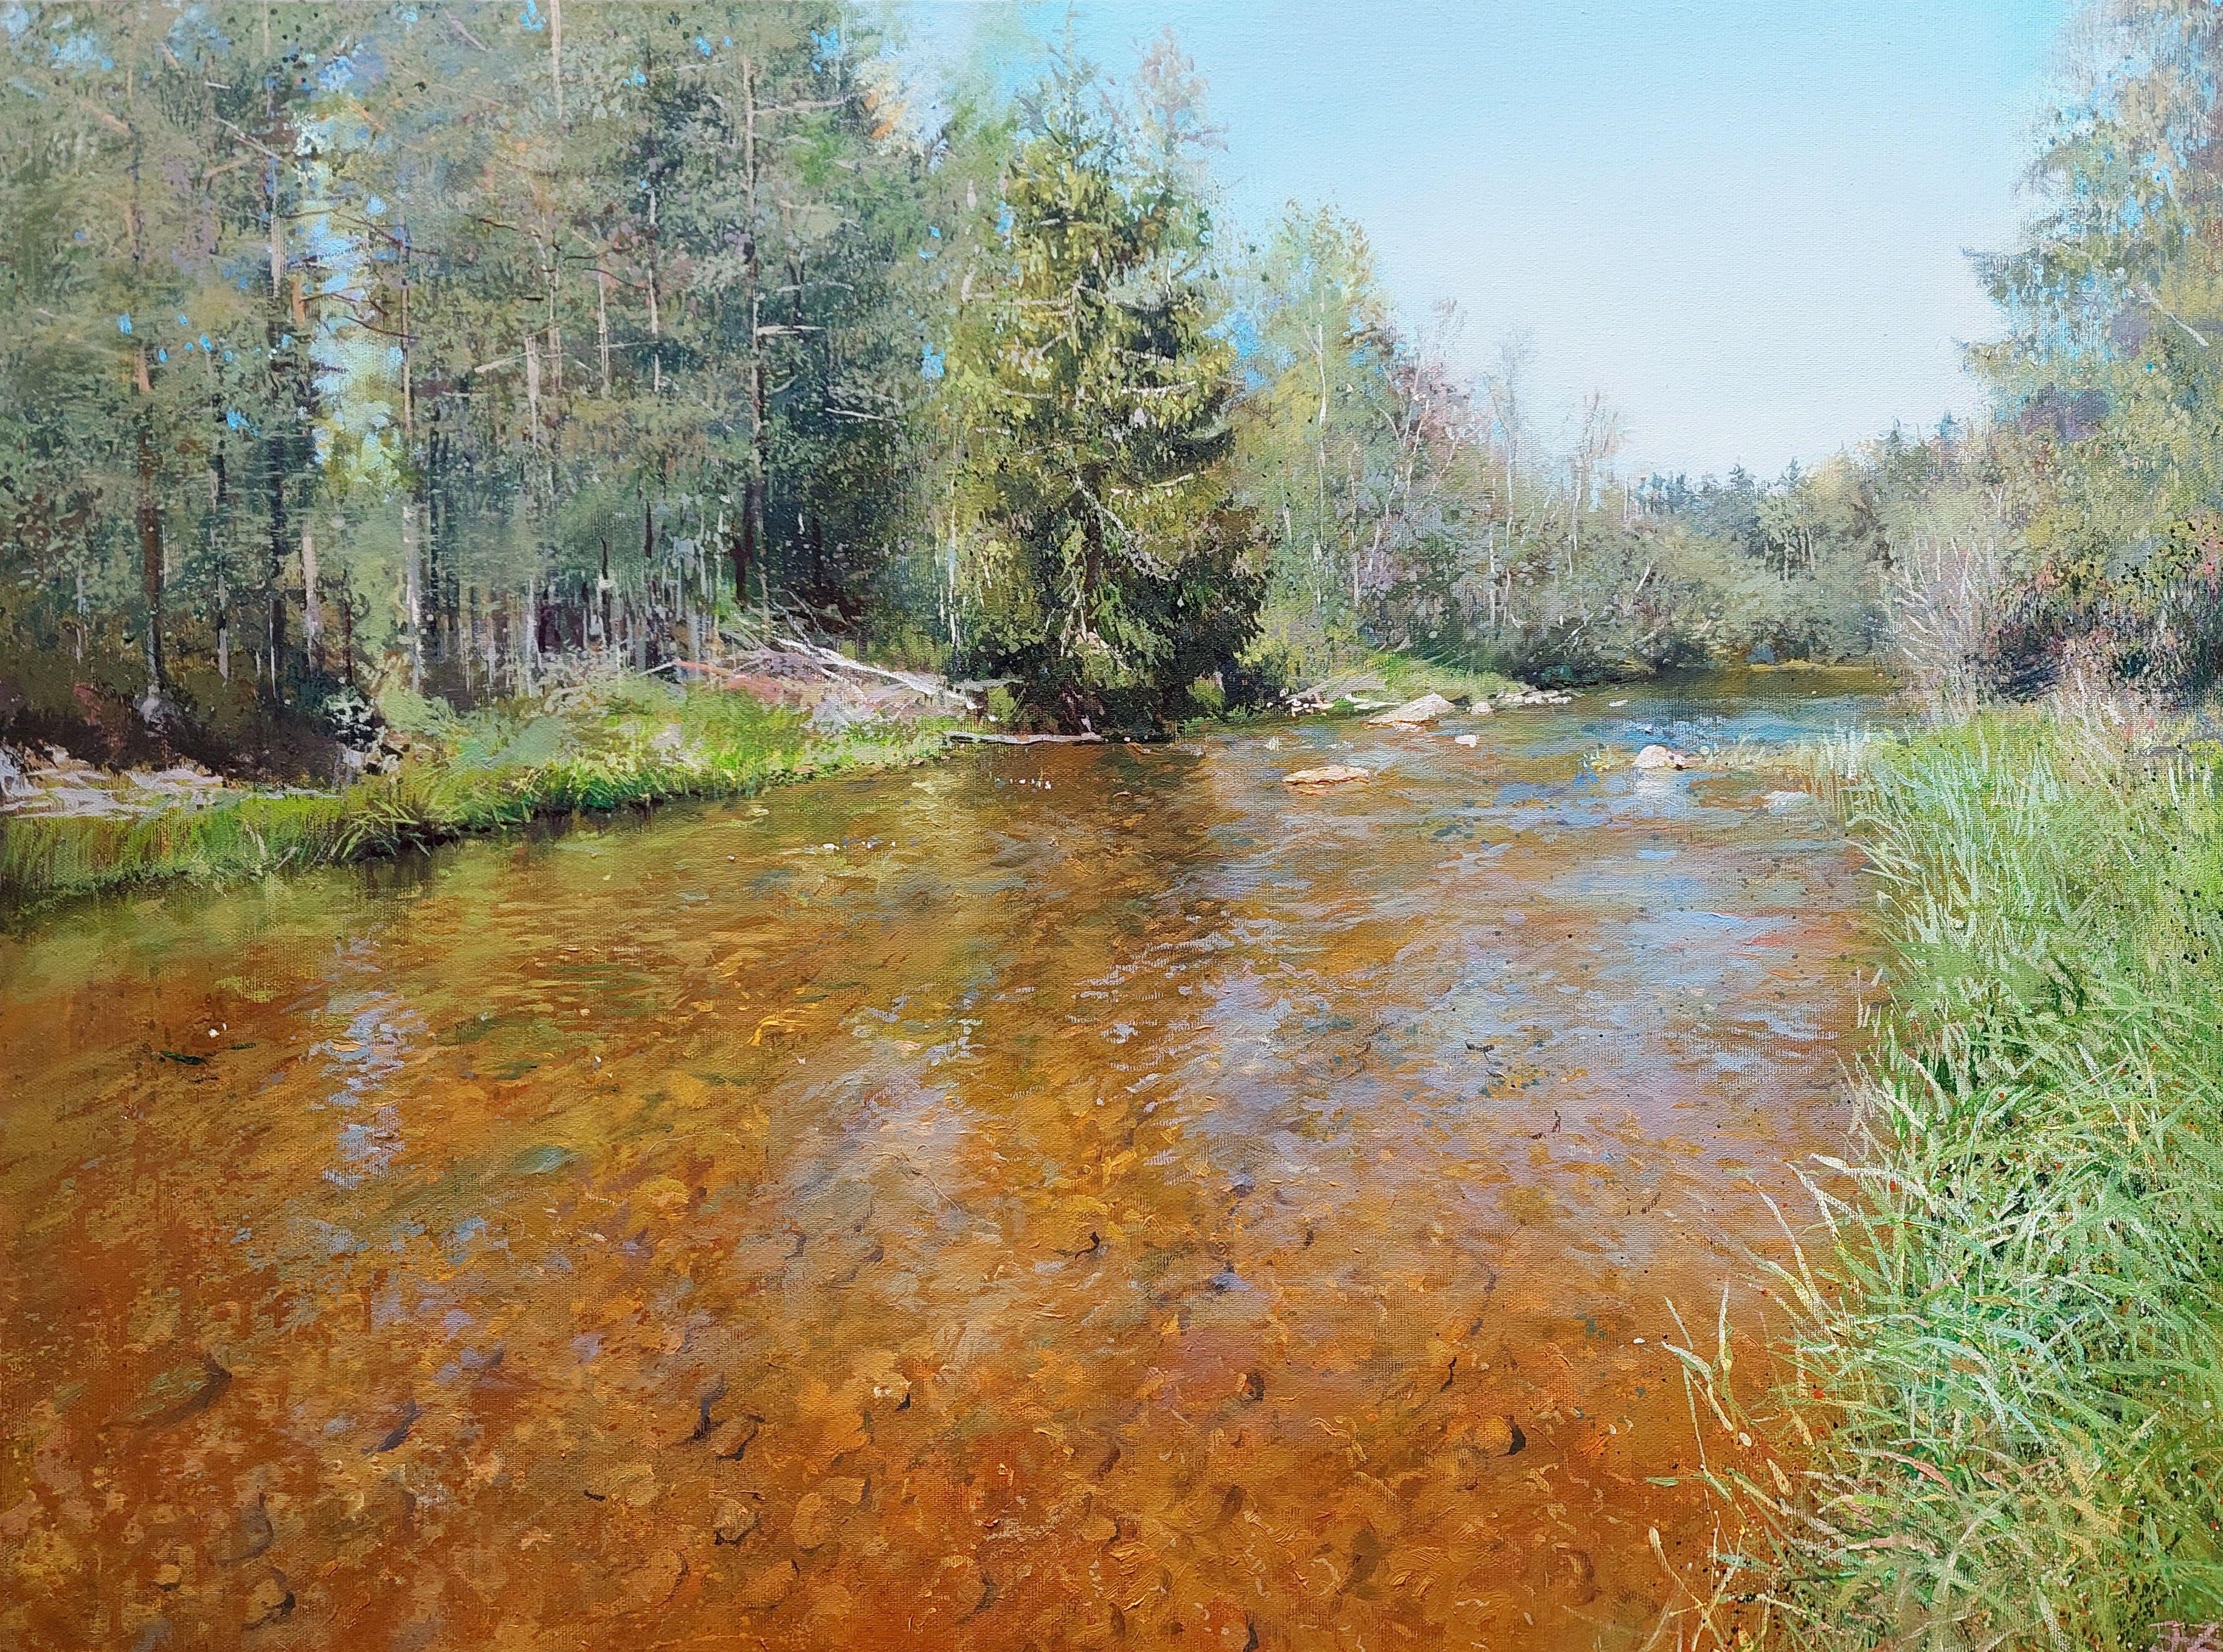 Janis Zingitis Landscape Painting - River in May, 2022., oil on canvas, 60x80 cm